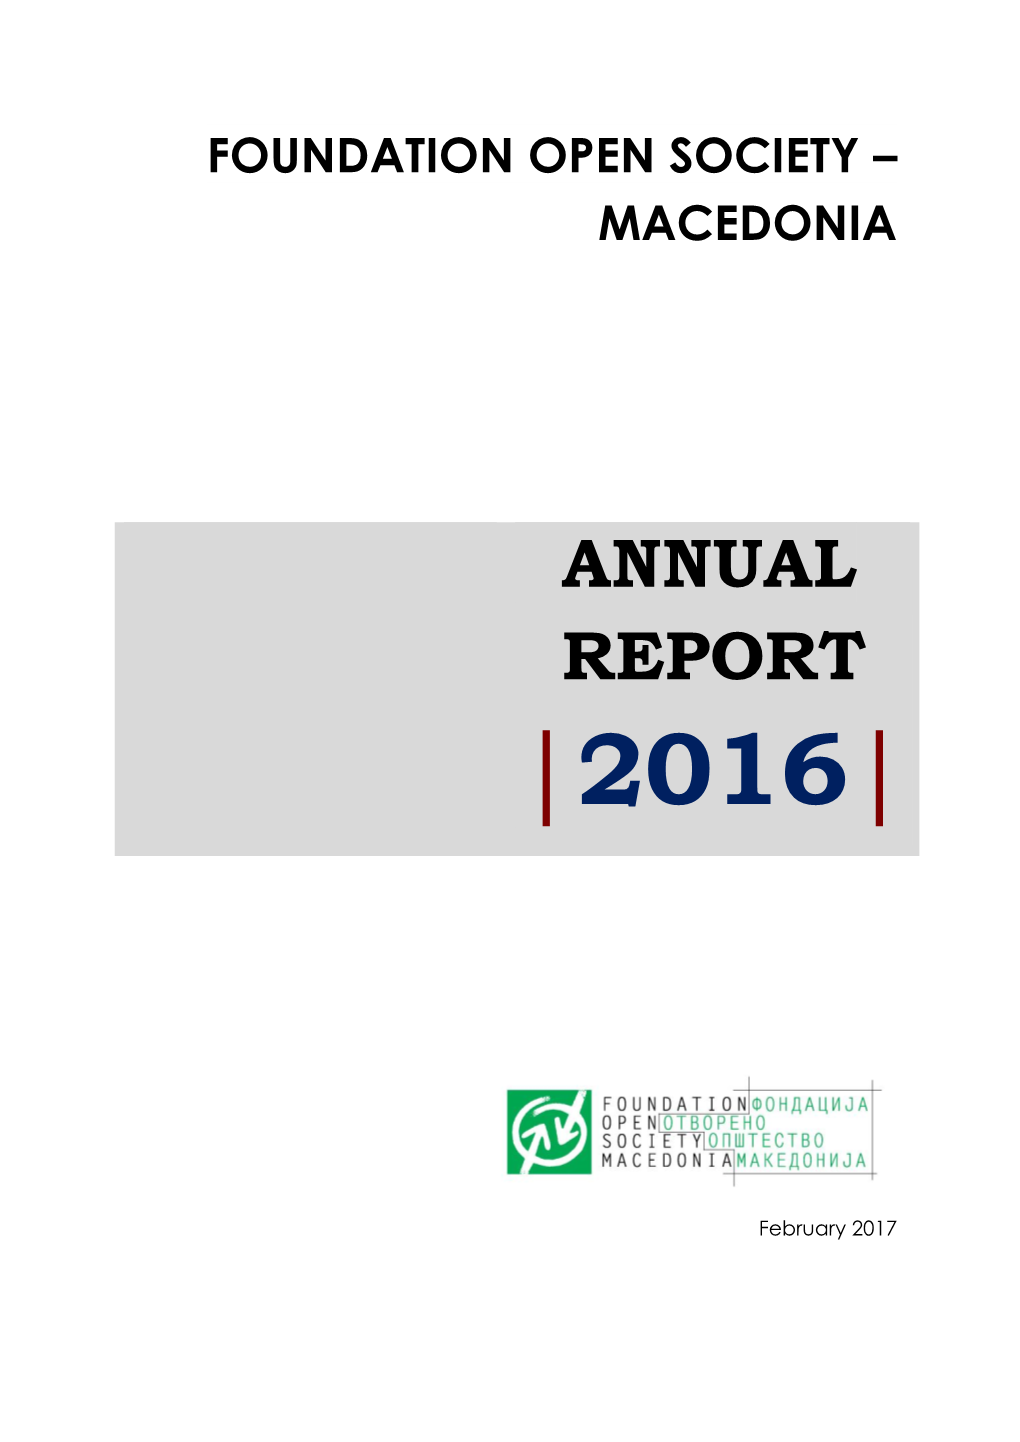 ANNUAL REPORT 2016 | Foundation Open Society - Macedonia | 2